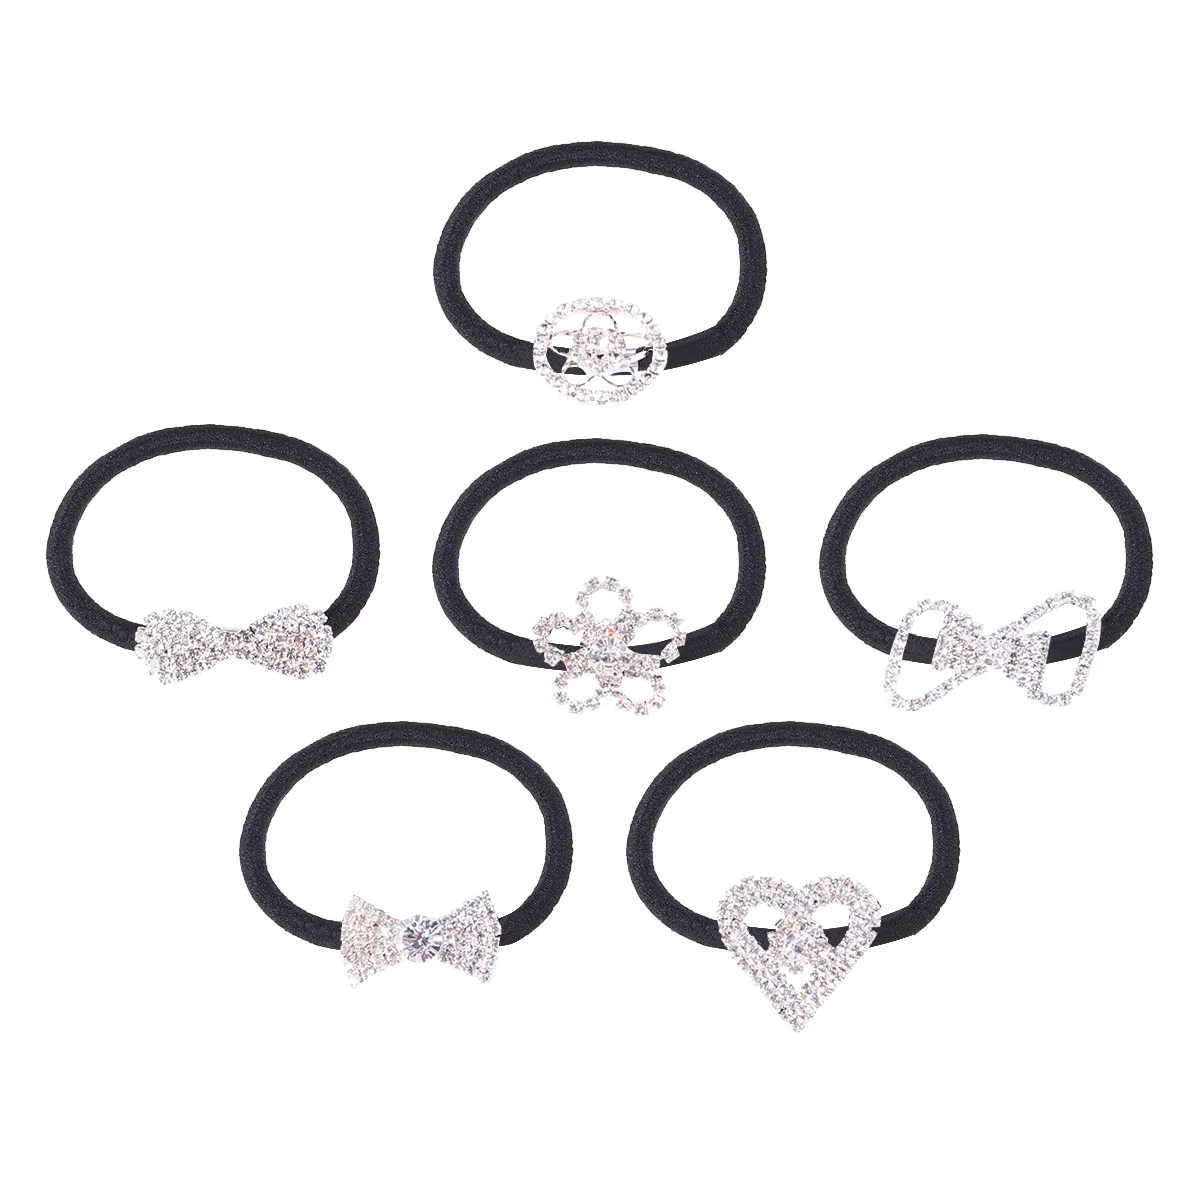 6pcs Elastic Hair Bands Durable Decorated Strong Hair Ties Hair Accessories Hair Rubber Bands